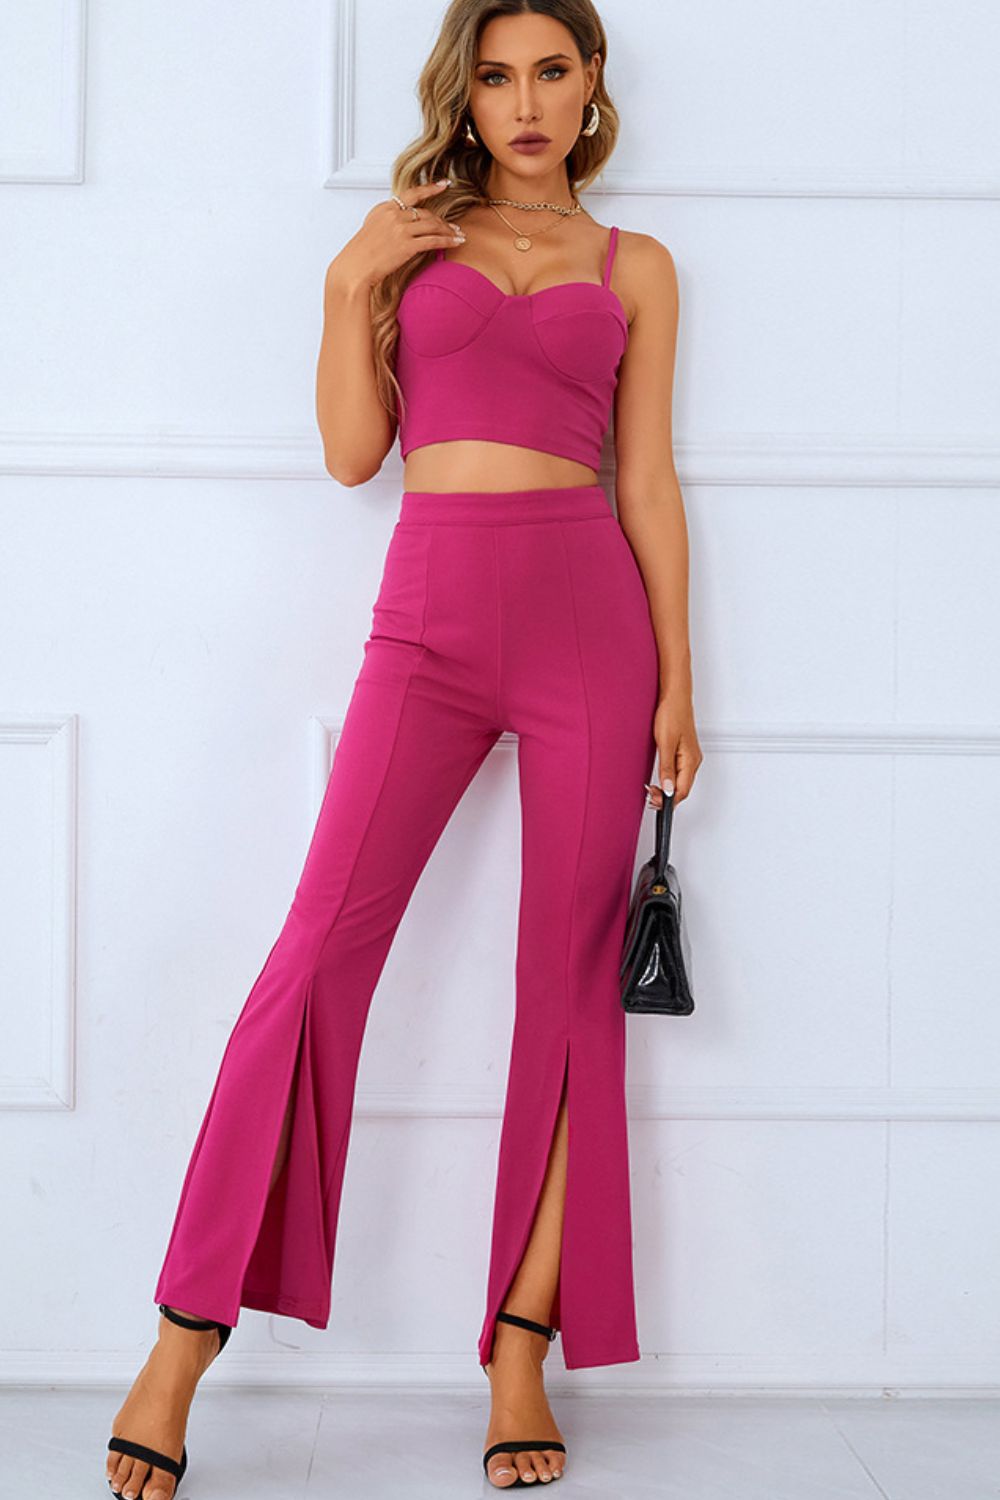 Sweetheart Neck Sports Cami and Slit Ankle Flare Pants Set Shapelust